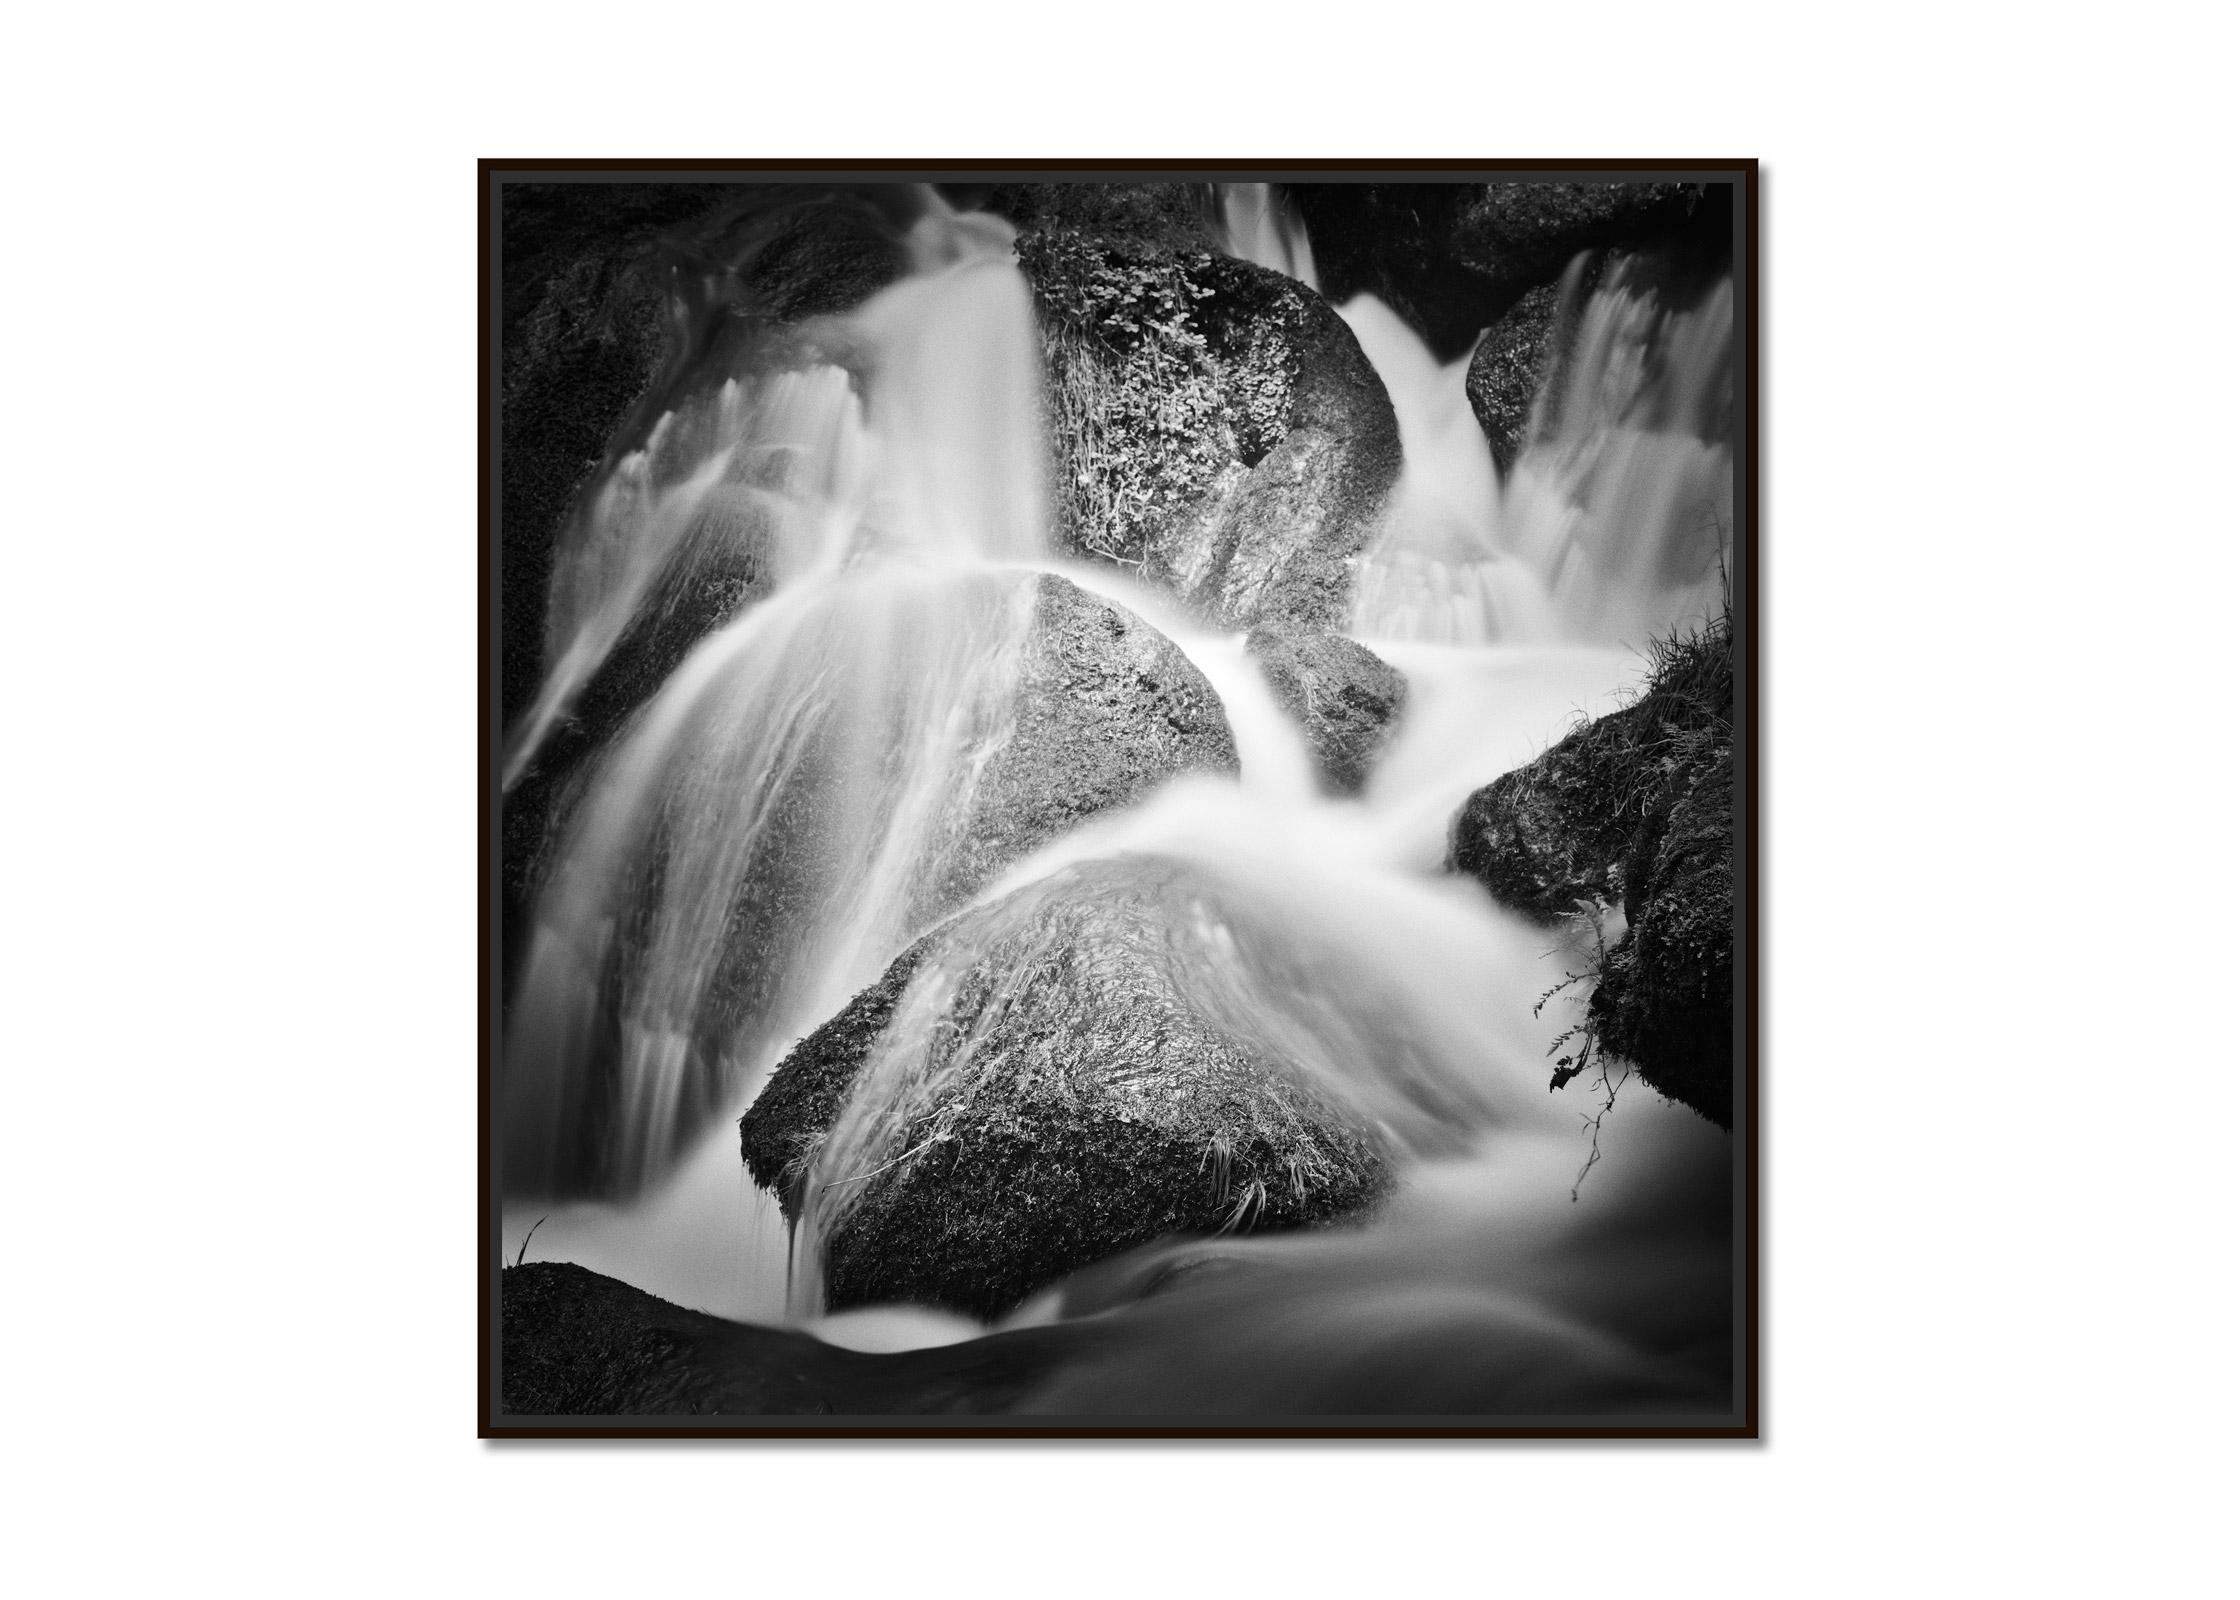 Mountain Stream, Austria, black and white photography, long exposure landscape - Photograph by Gerald Berghammer